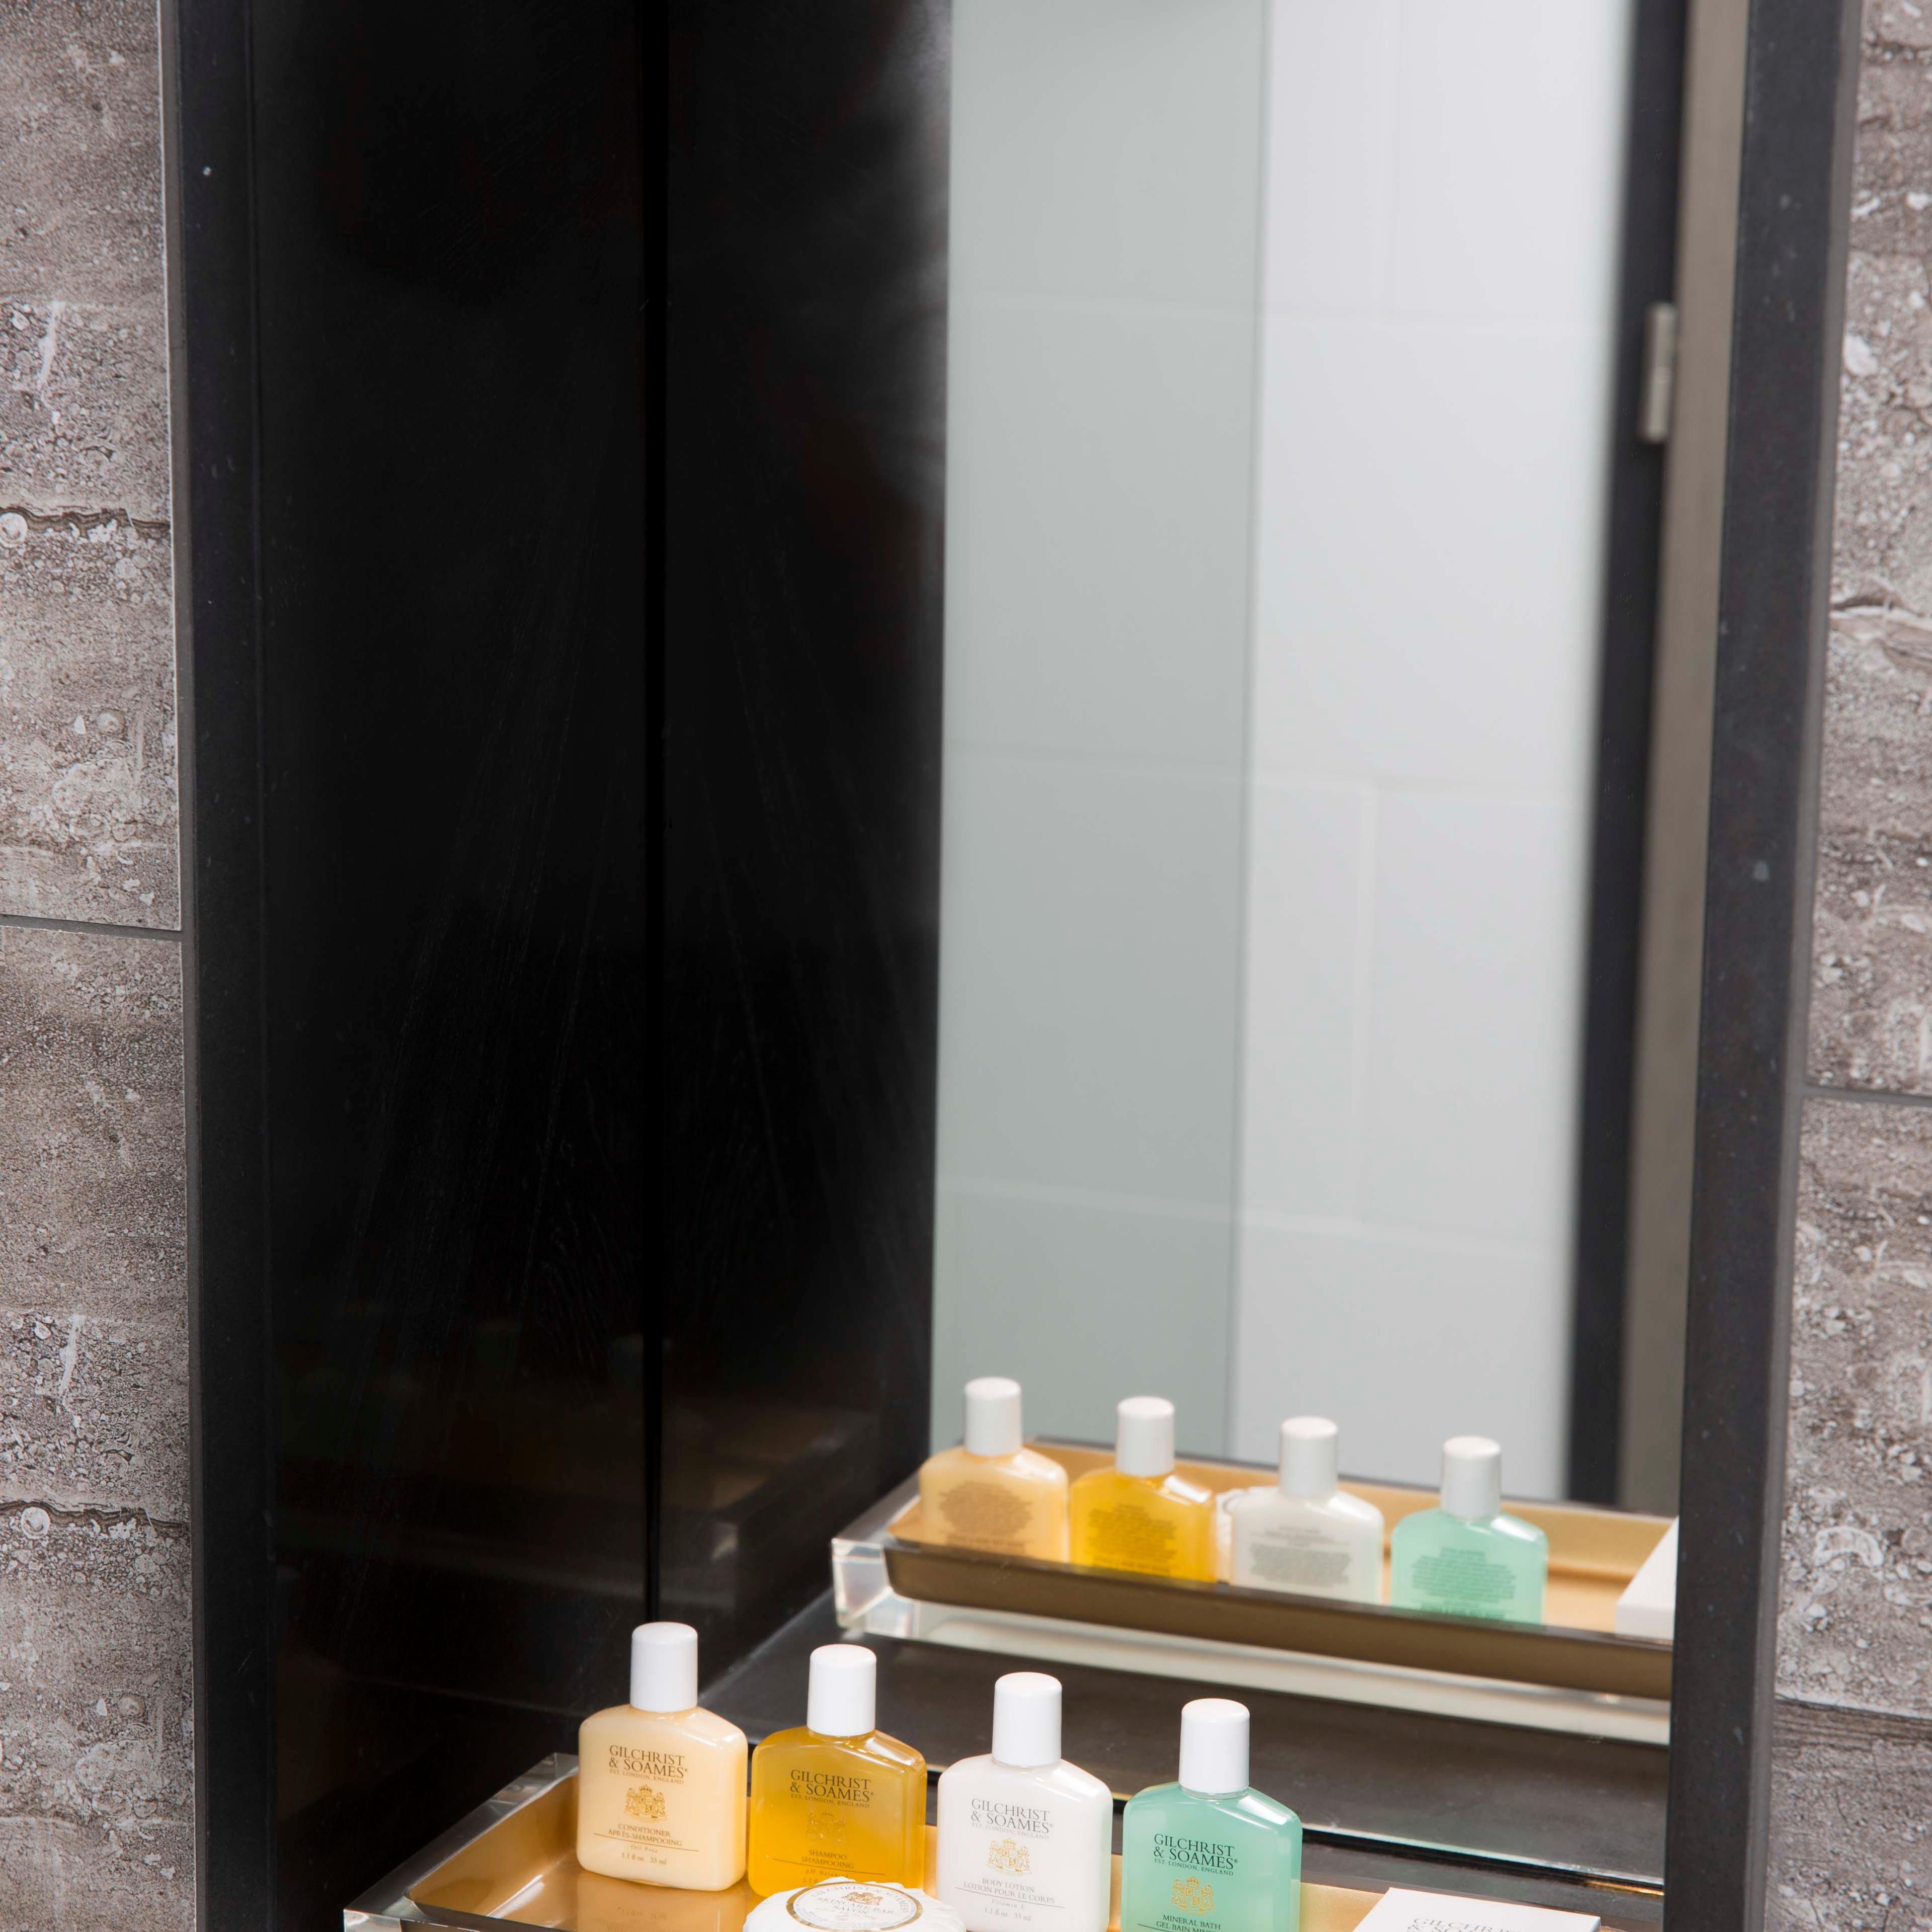 Enjoy a wide range of luxurious toiletries in our bathrooms.